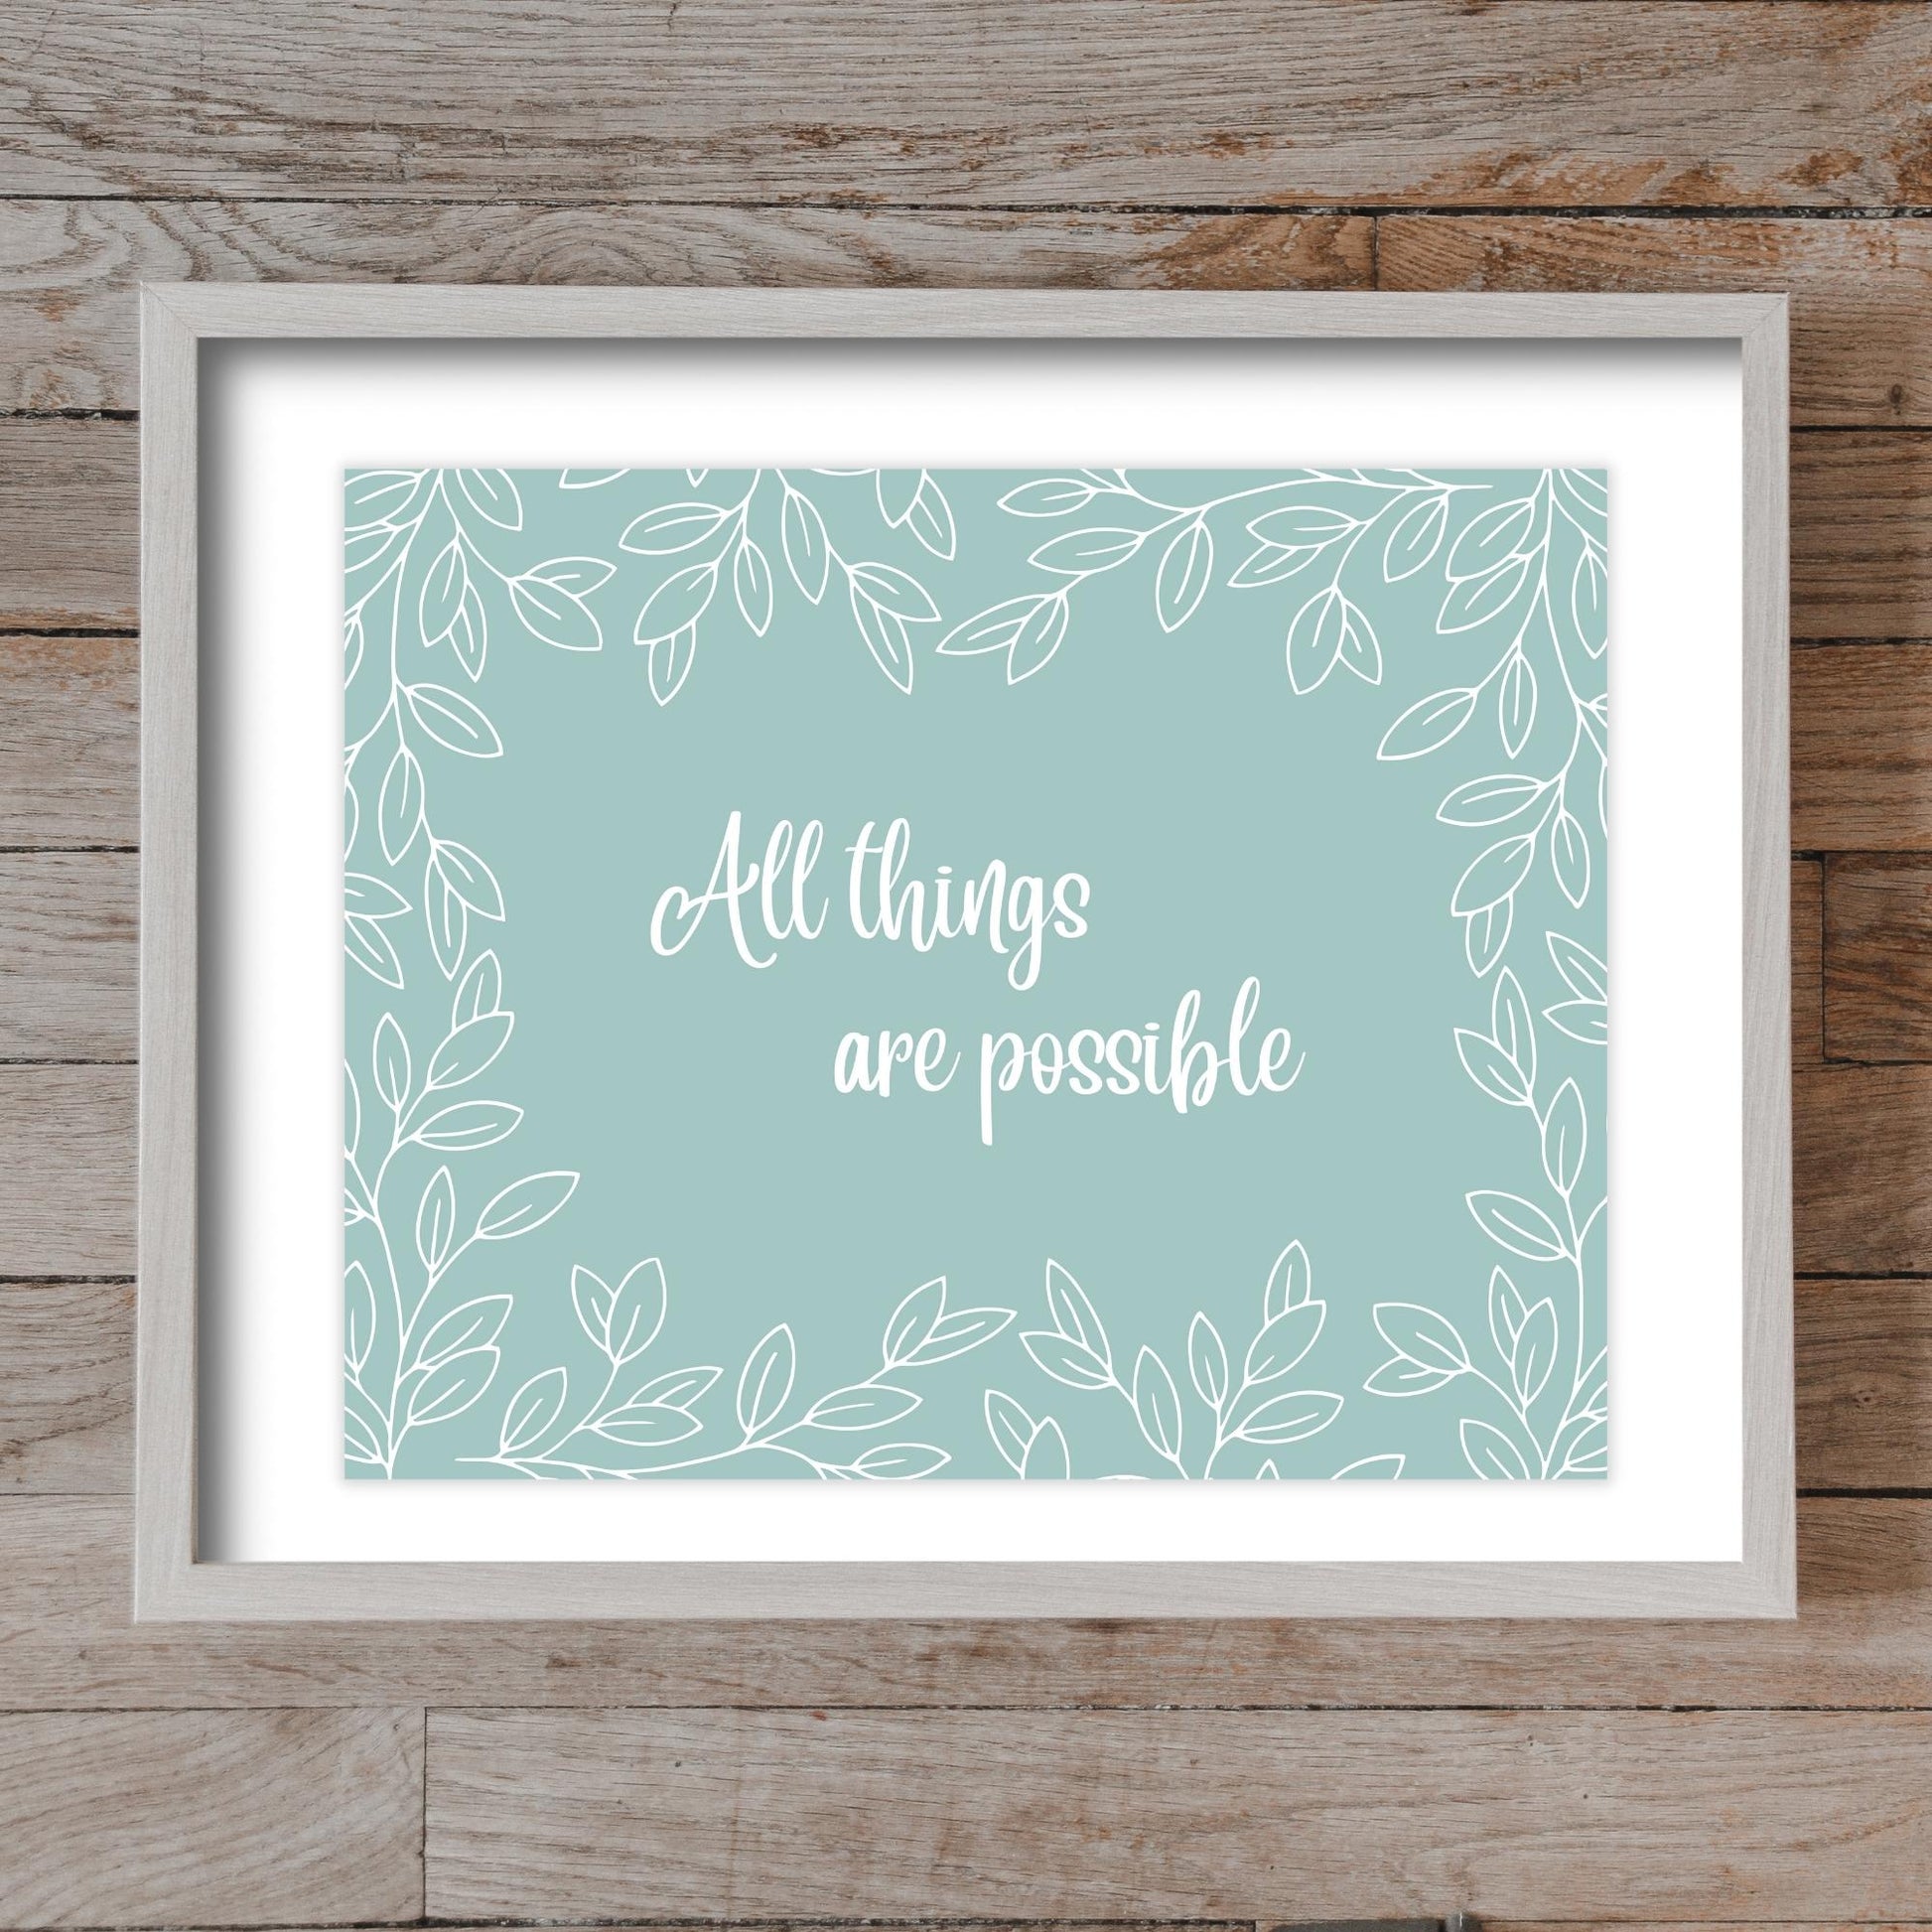 Inspirational Word Art - All things are possible - Leaf Design Wall Decor (10x8 print) choose from 5 colors | Light Teal shown in wood frame against rustic wood wall | oak7west.com